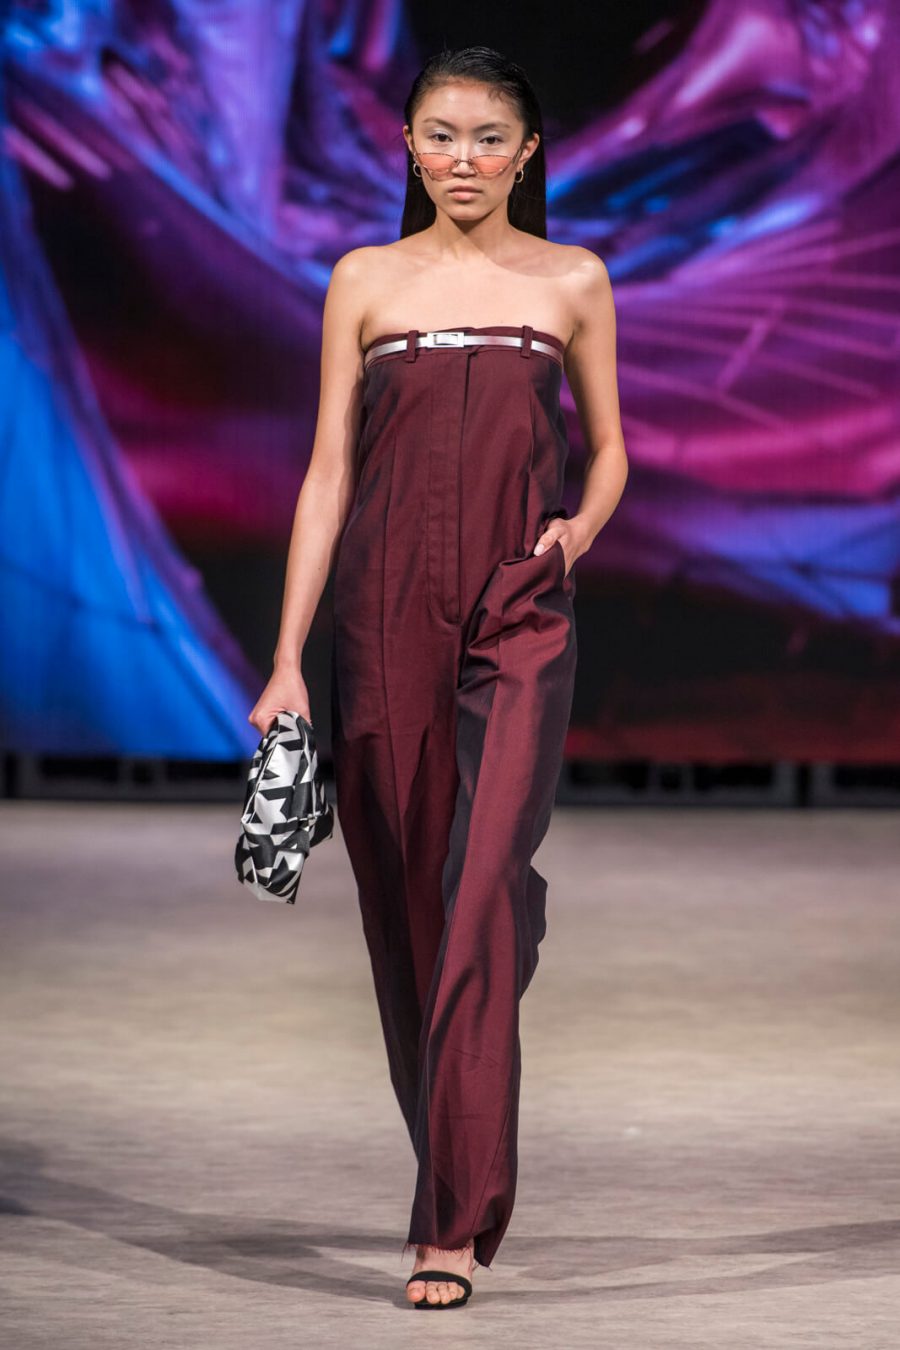 Vancouver Fashion Week F/W 19 *HIGHLIGHTS* – A Million Styles